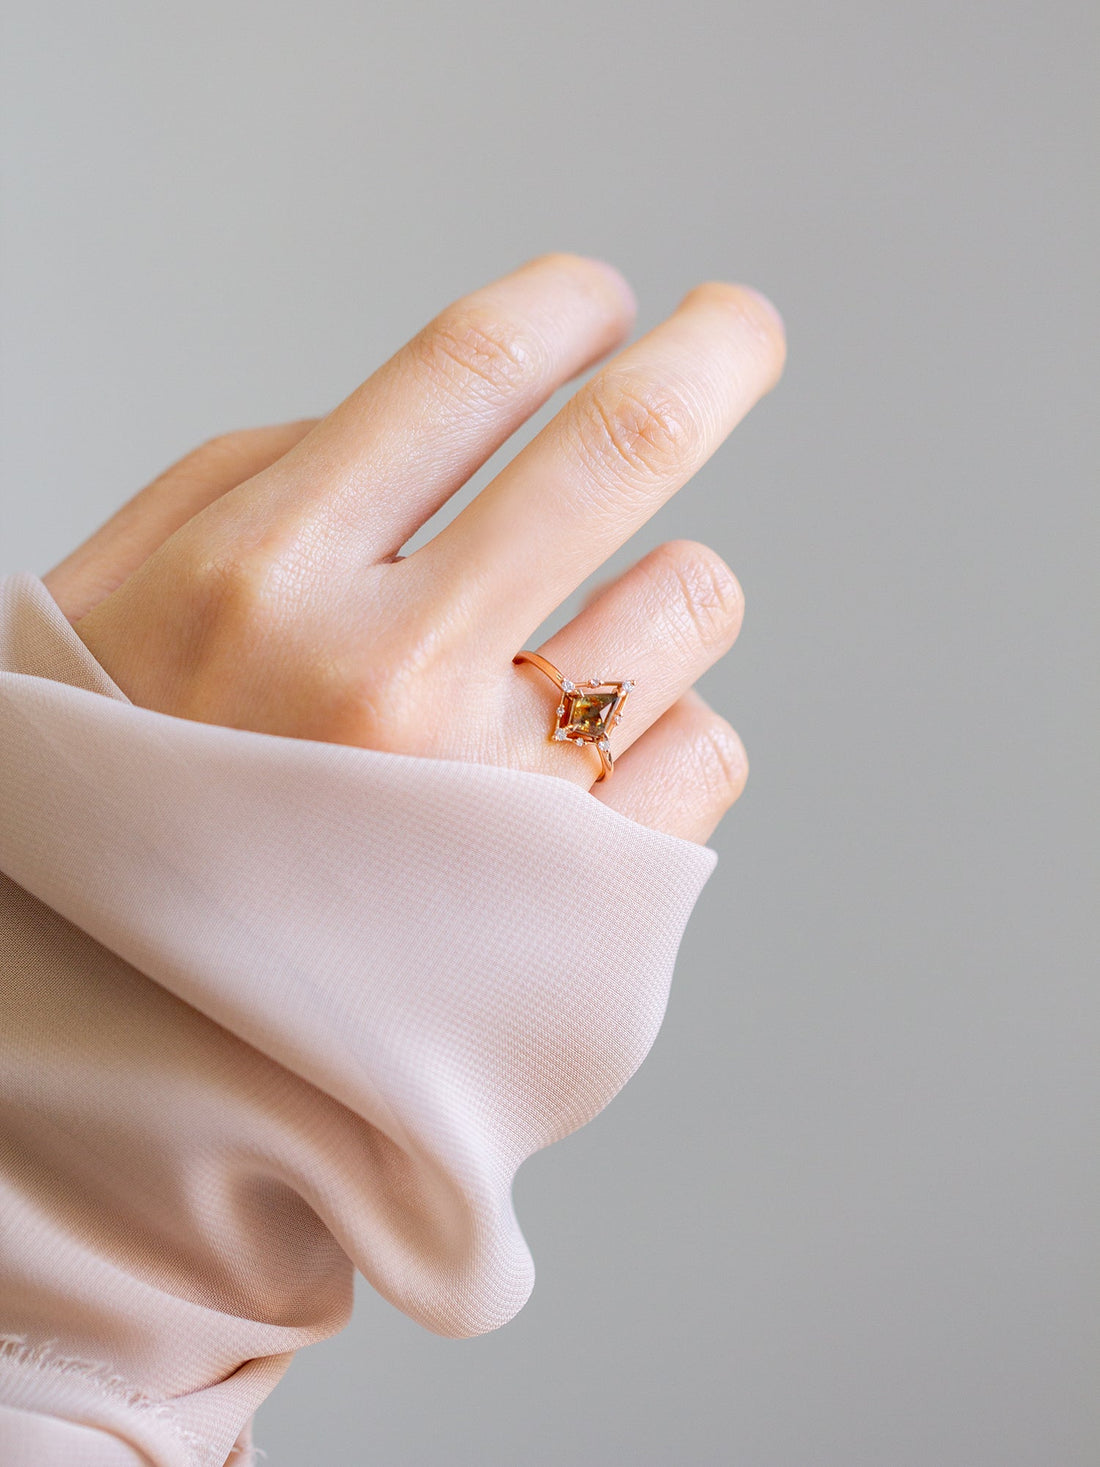 Minimal art deco styled kite shaped salt and pepper diamond engagement ring in 14k rose gold with smaller round diamonds on model&